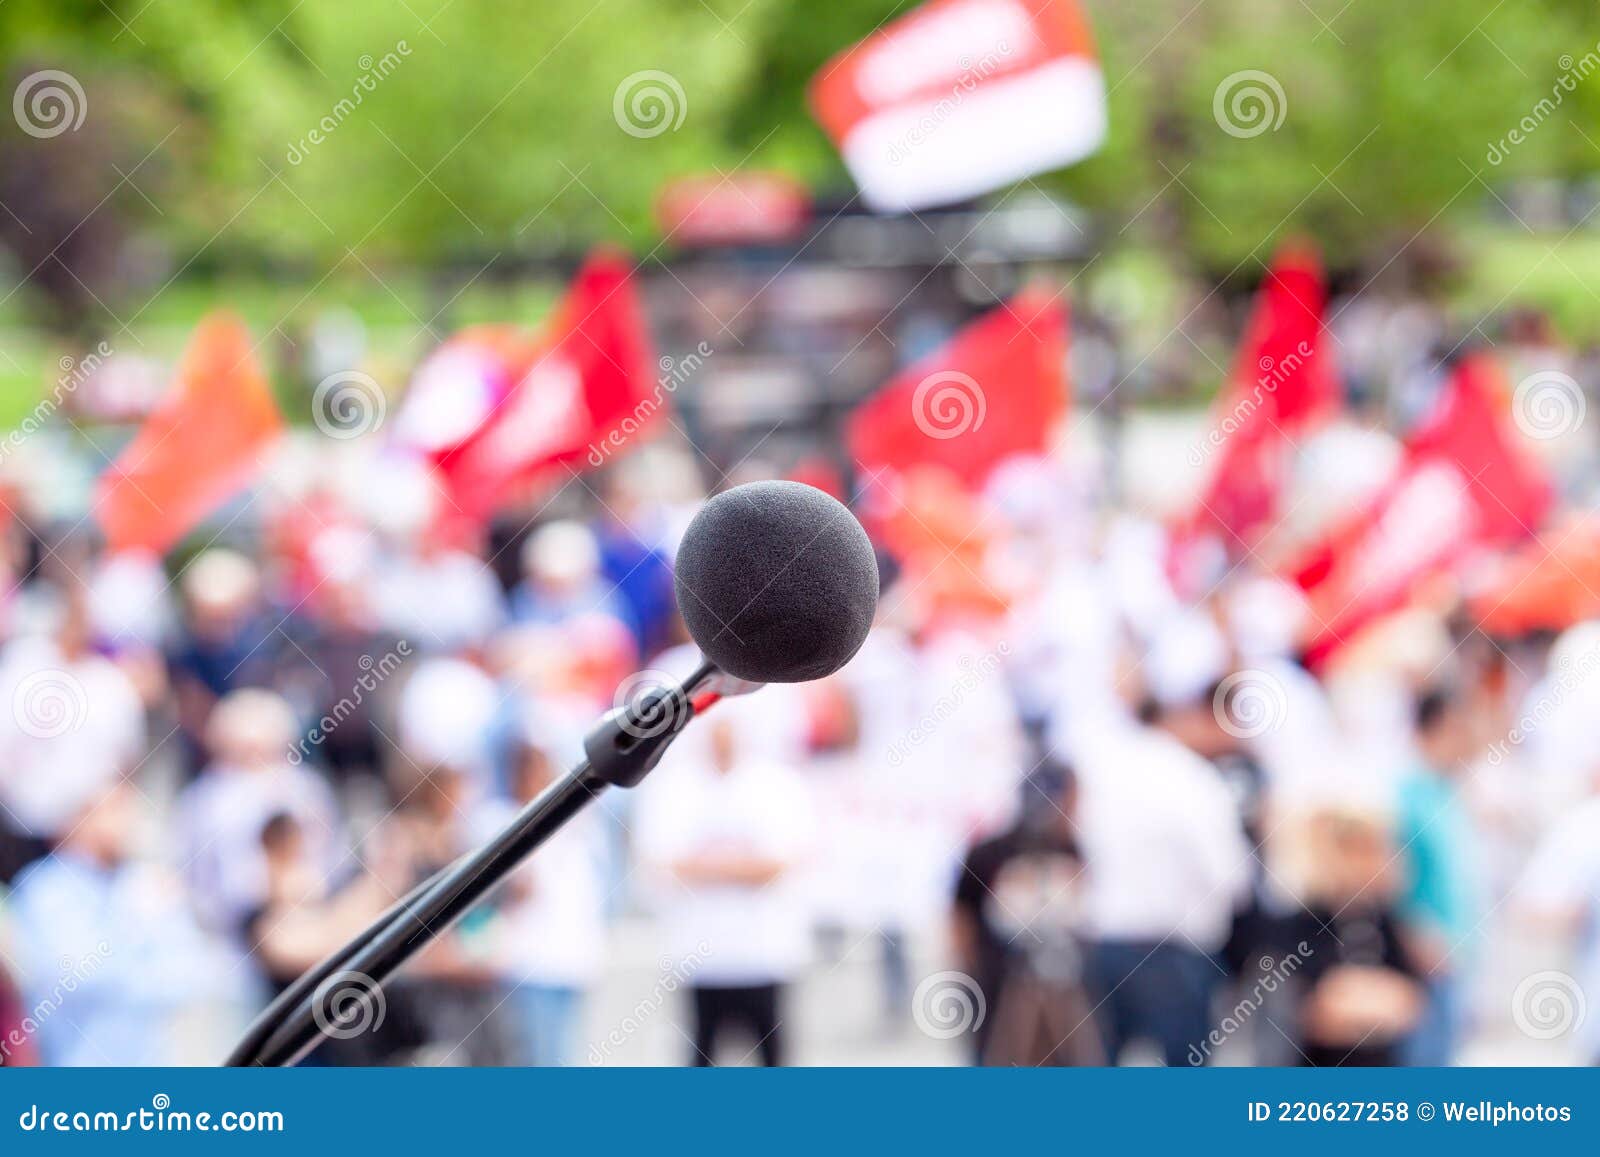 Political Protest or Public Demonstration, Focus on Microphone, Blurred  Crowd of People Holding Flags in the Background Stock Photo - Image of  unrecognizable, civil: 220627258